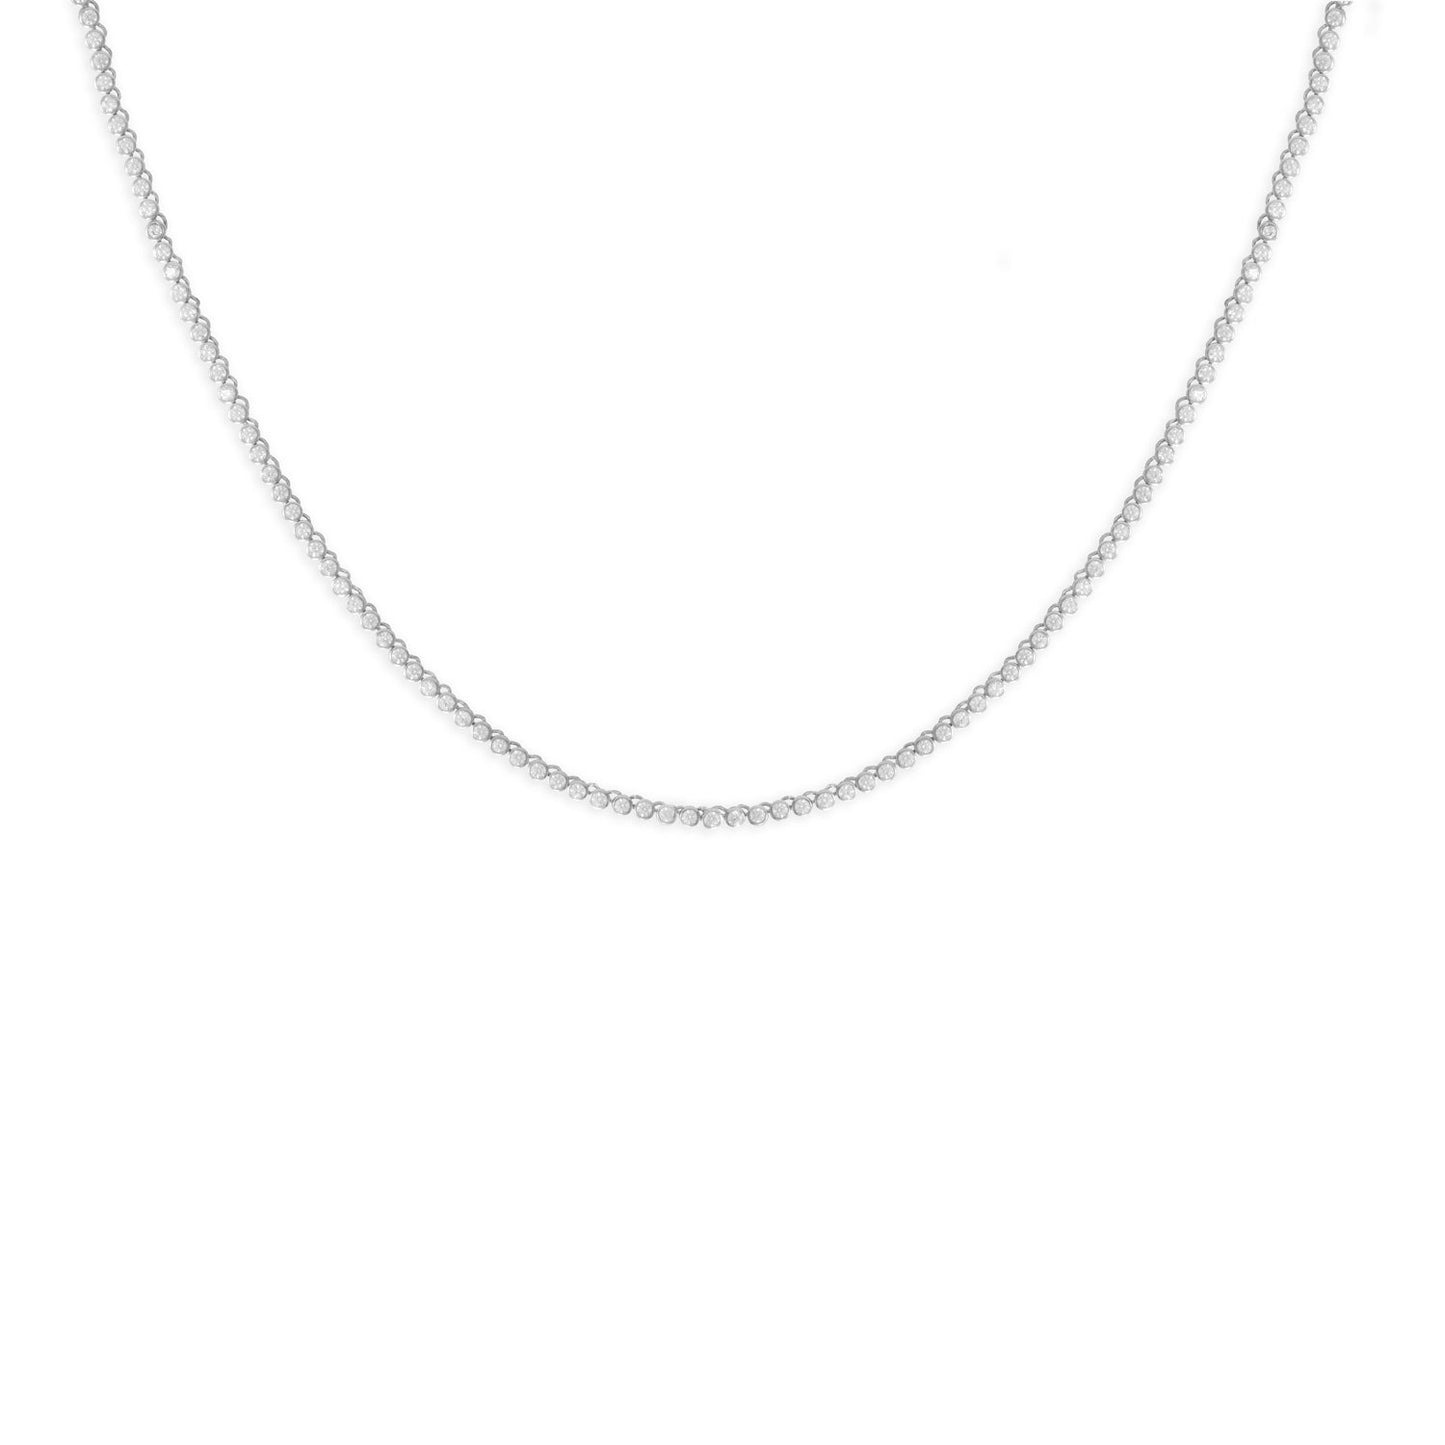 Precious Stars Rhodium-Plated Sterling Silver 2mm Round Cubic Zirconia Tennis Necklace - 15"